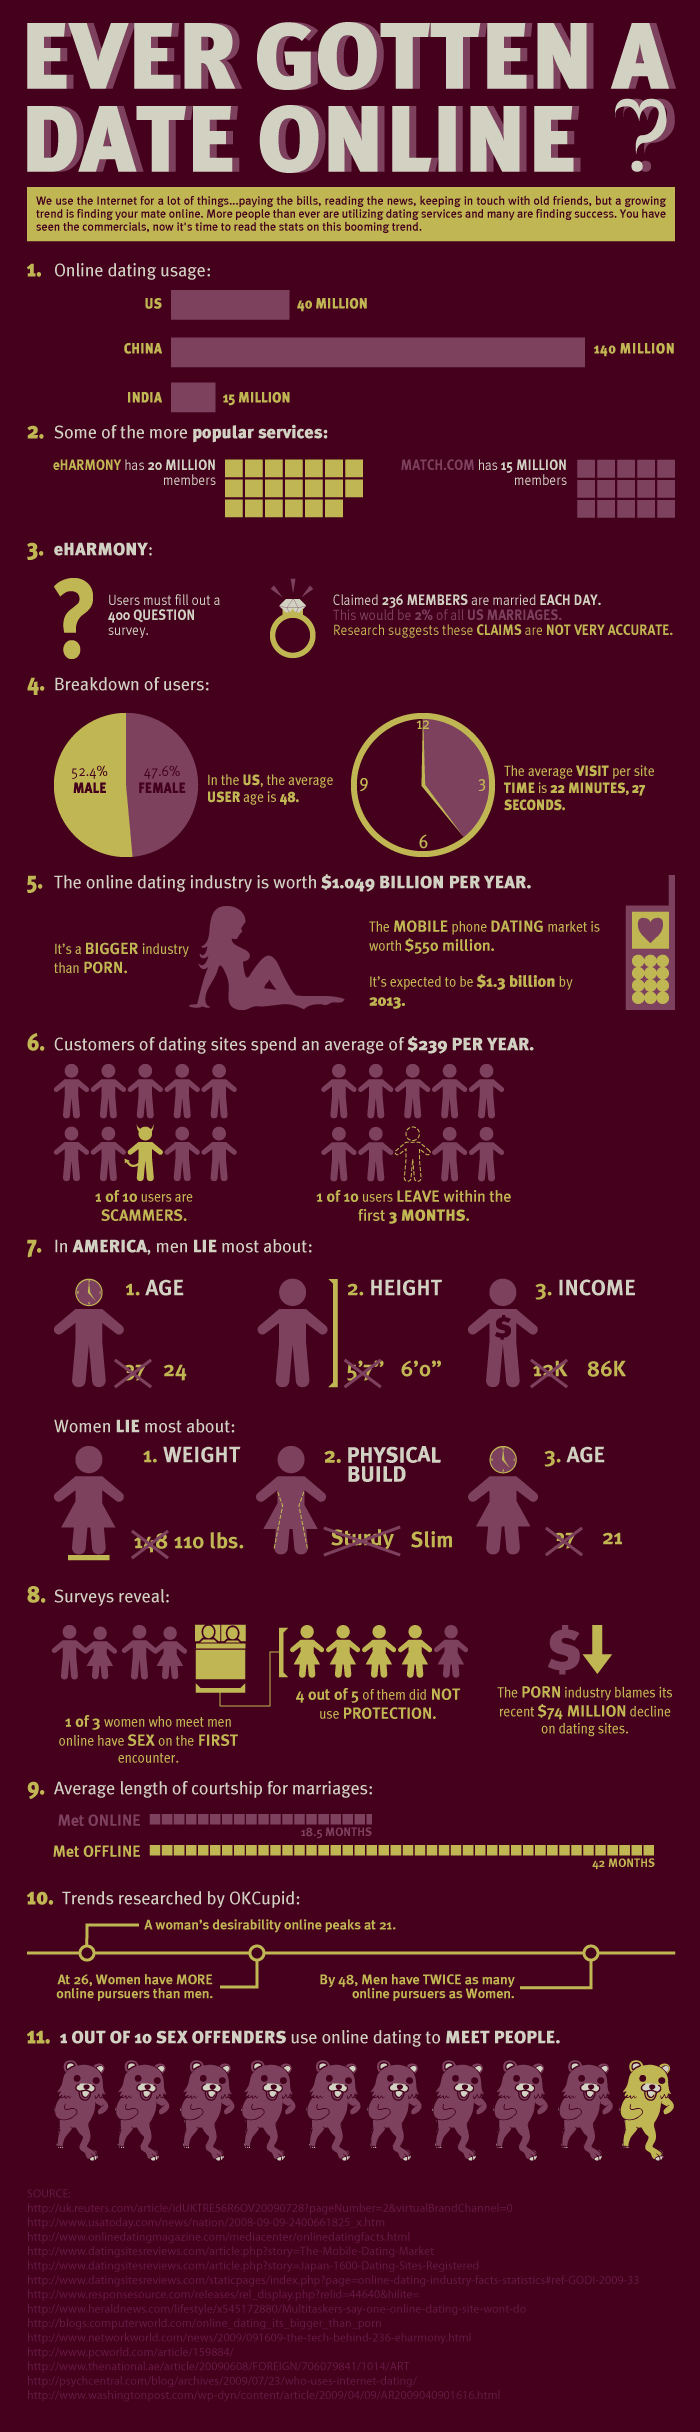 Ever Gotten a Date Online? Infographic